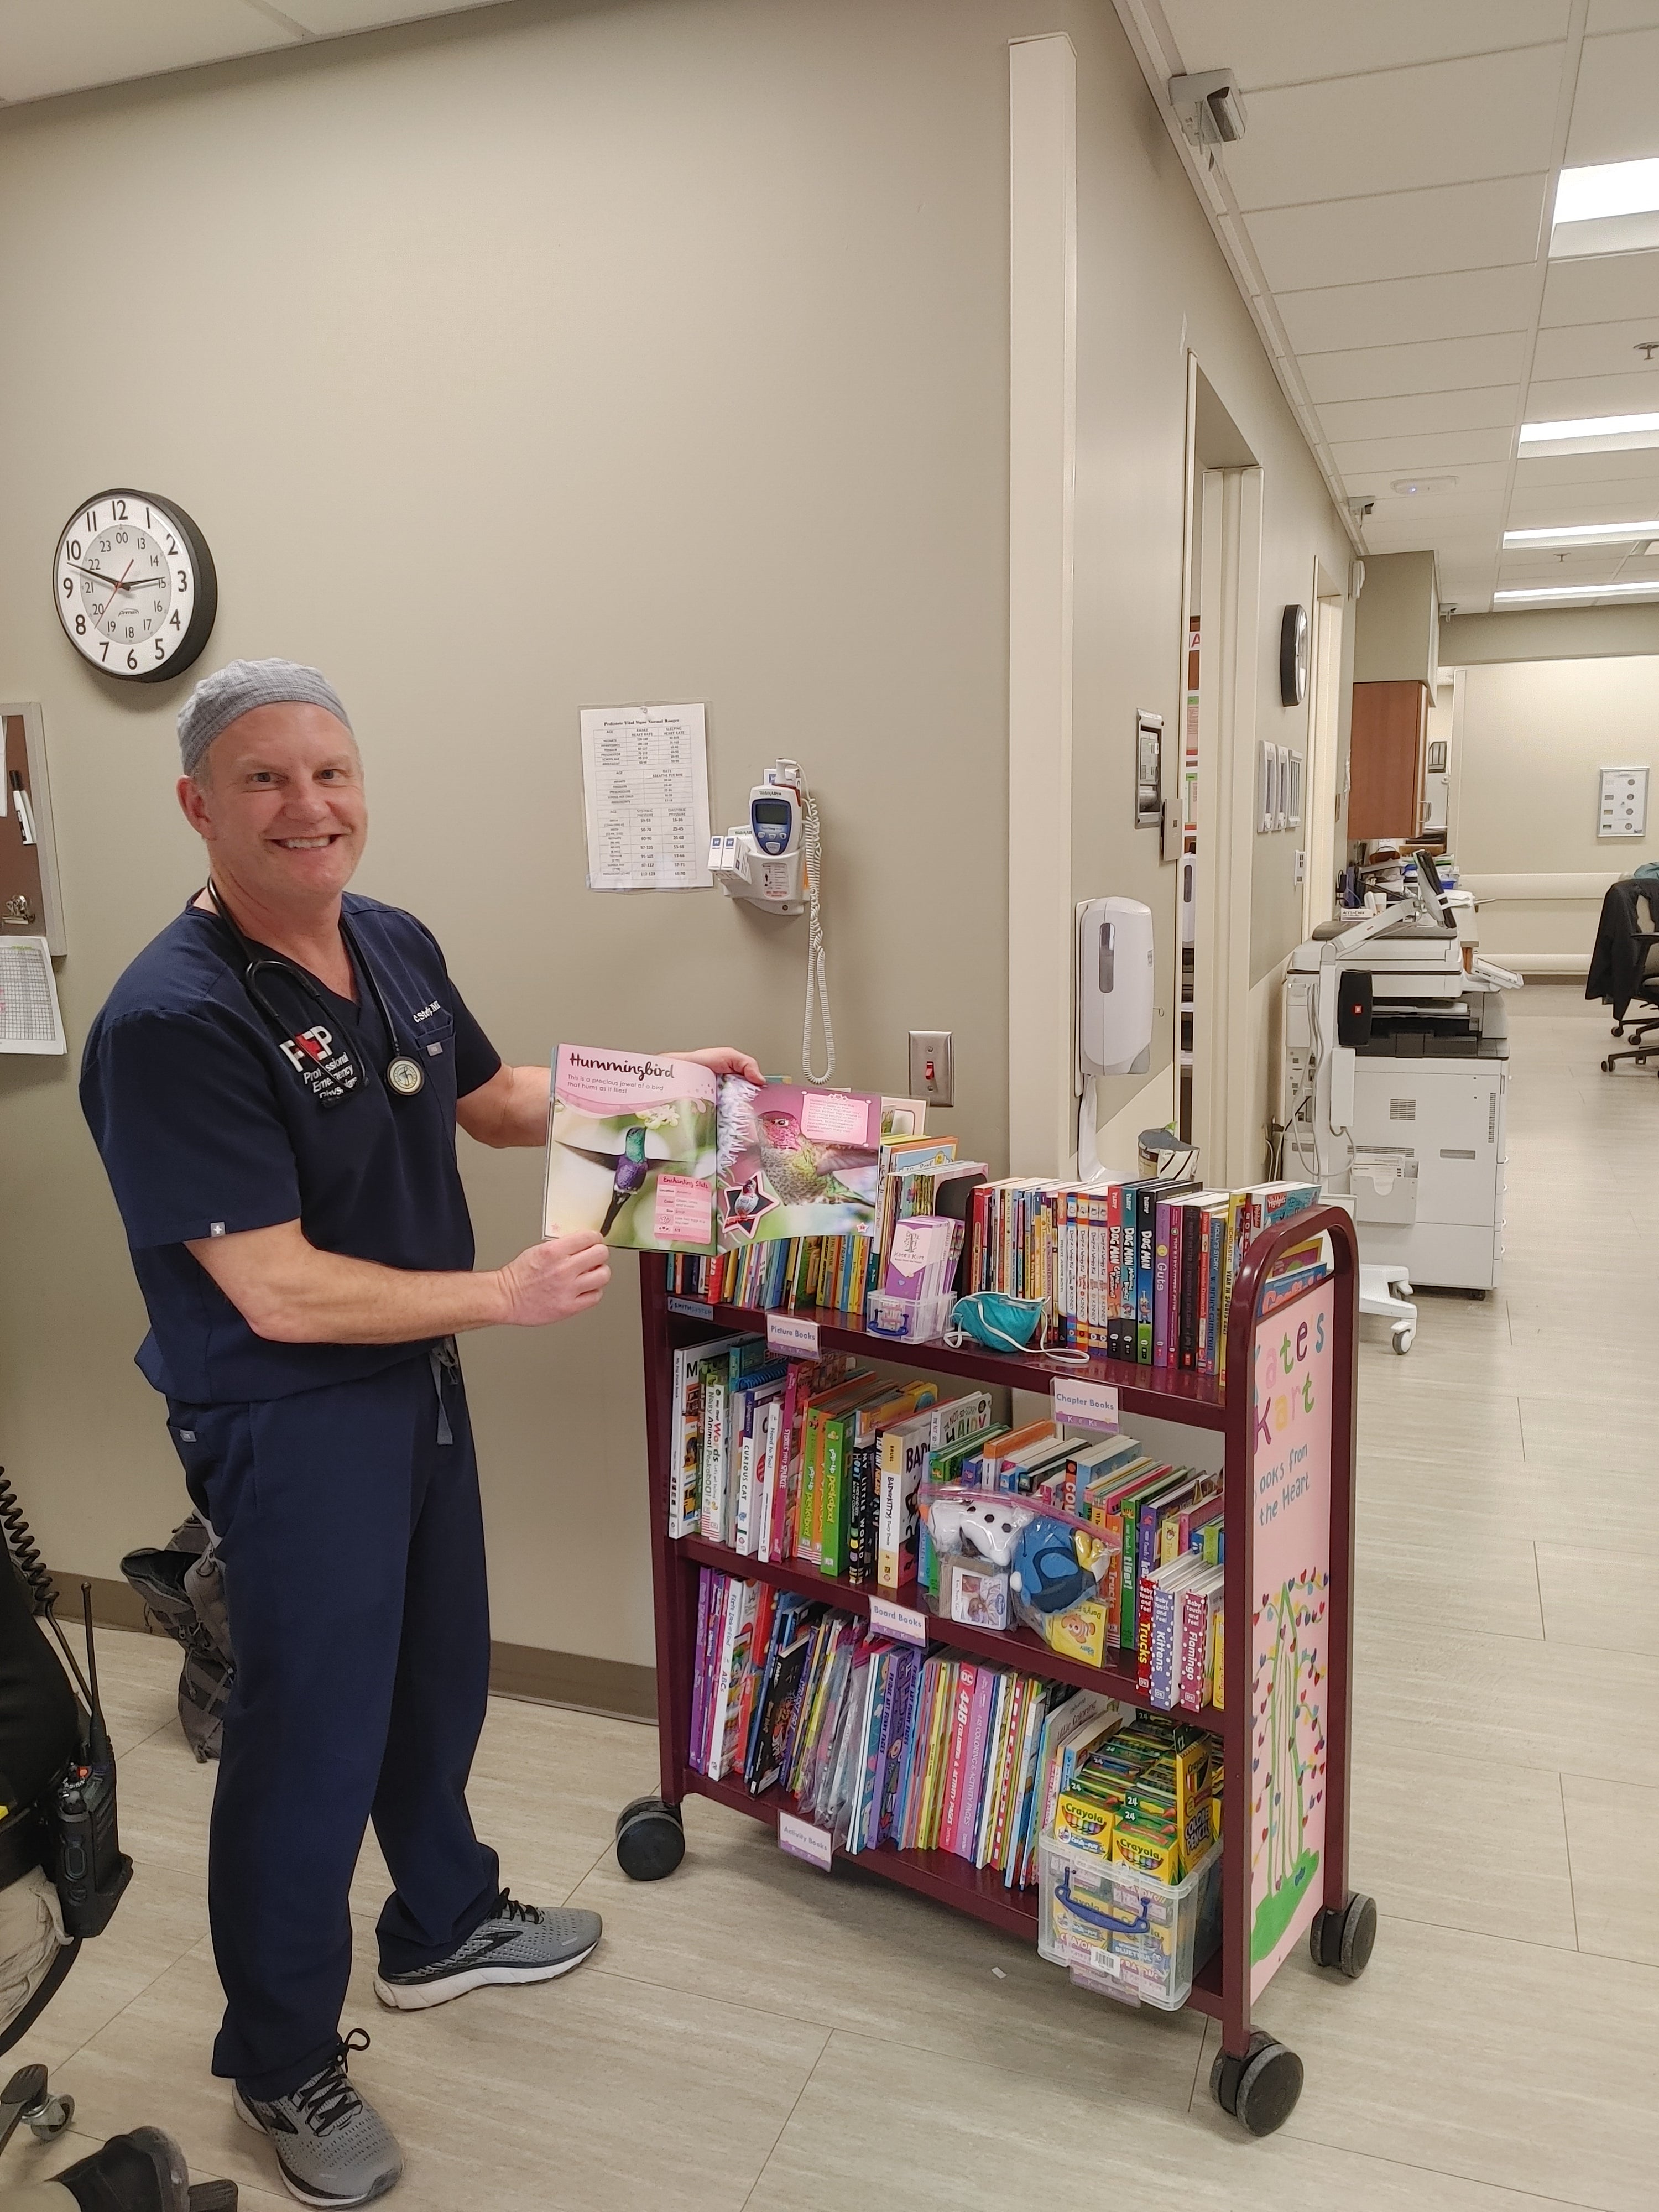 ER doctor with a Kate's Kart book cart